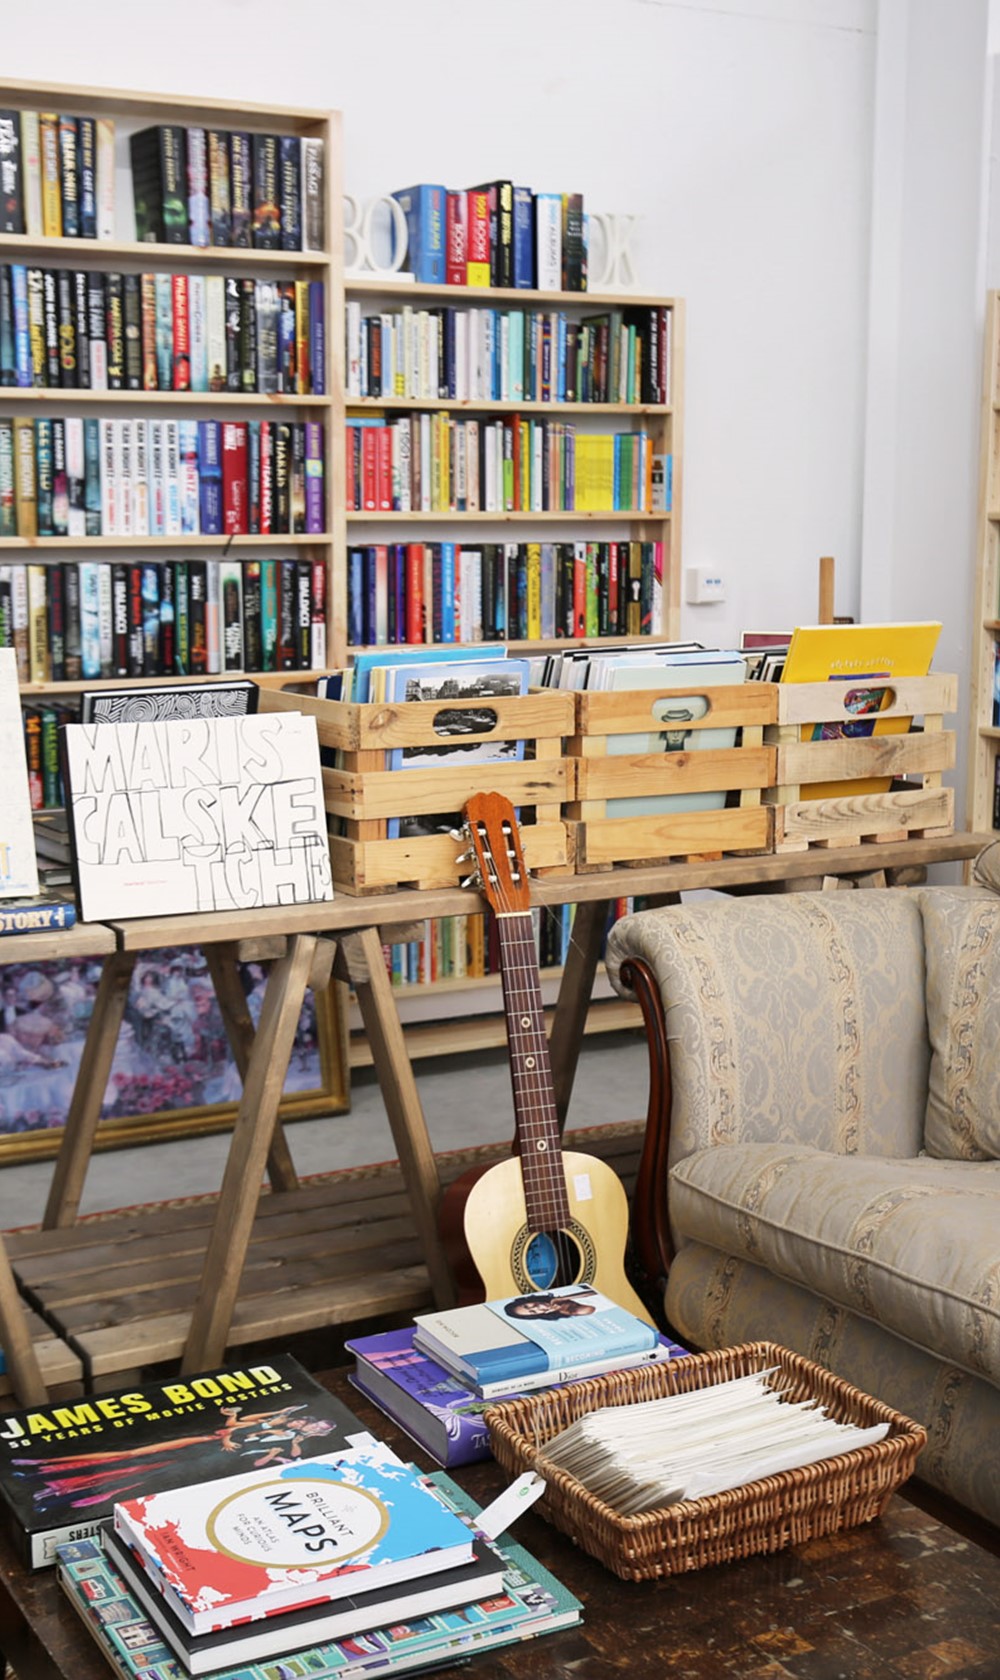 Books and vinyl on display at Durrell charity shop